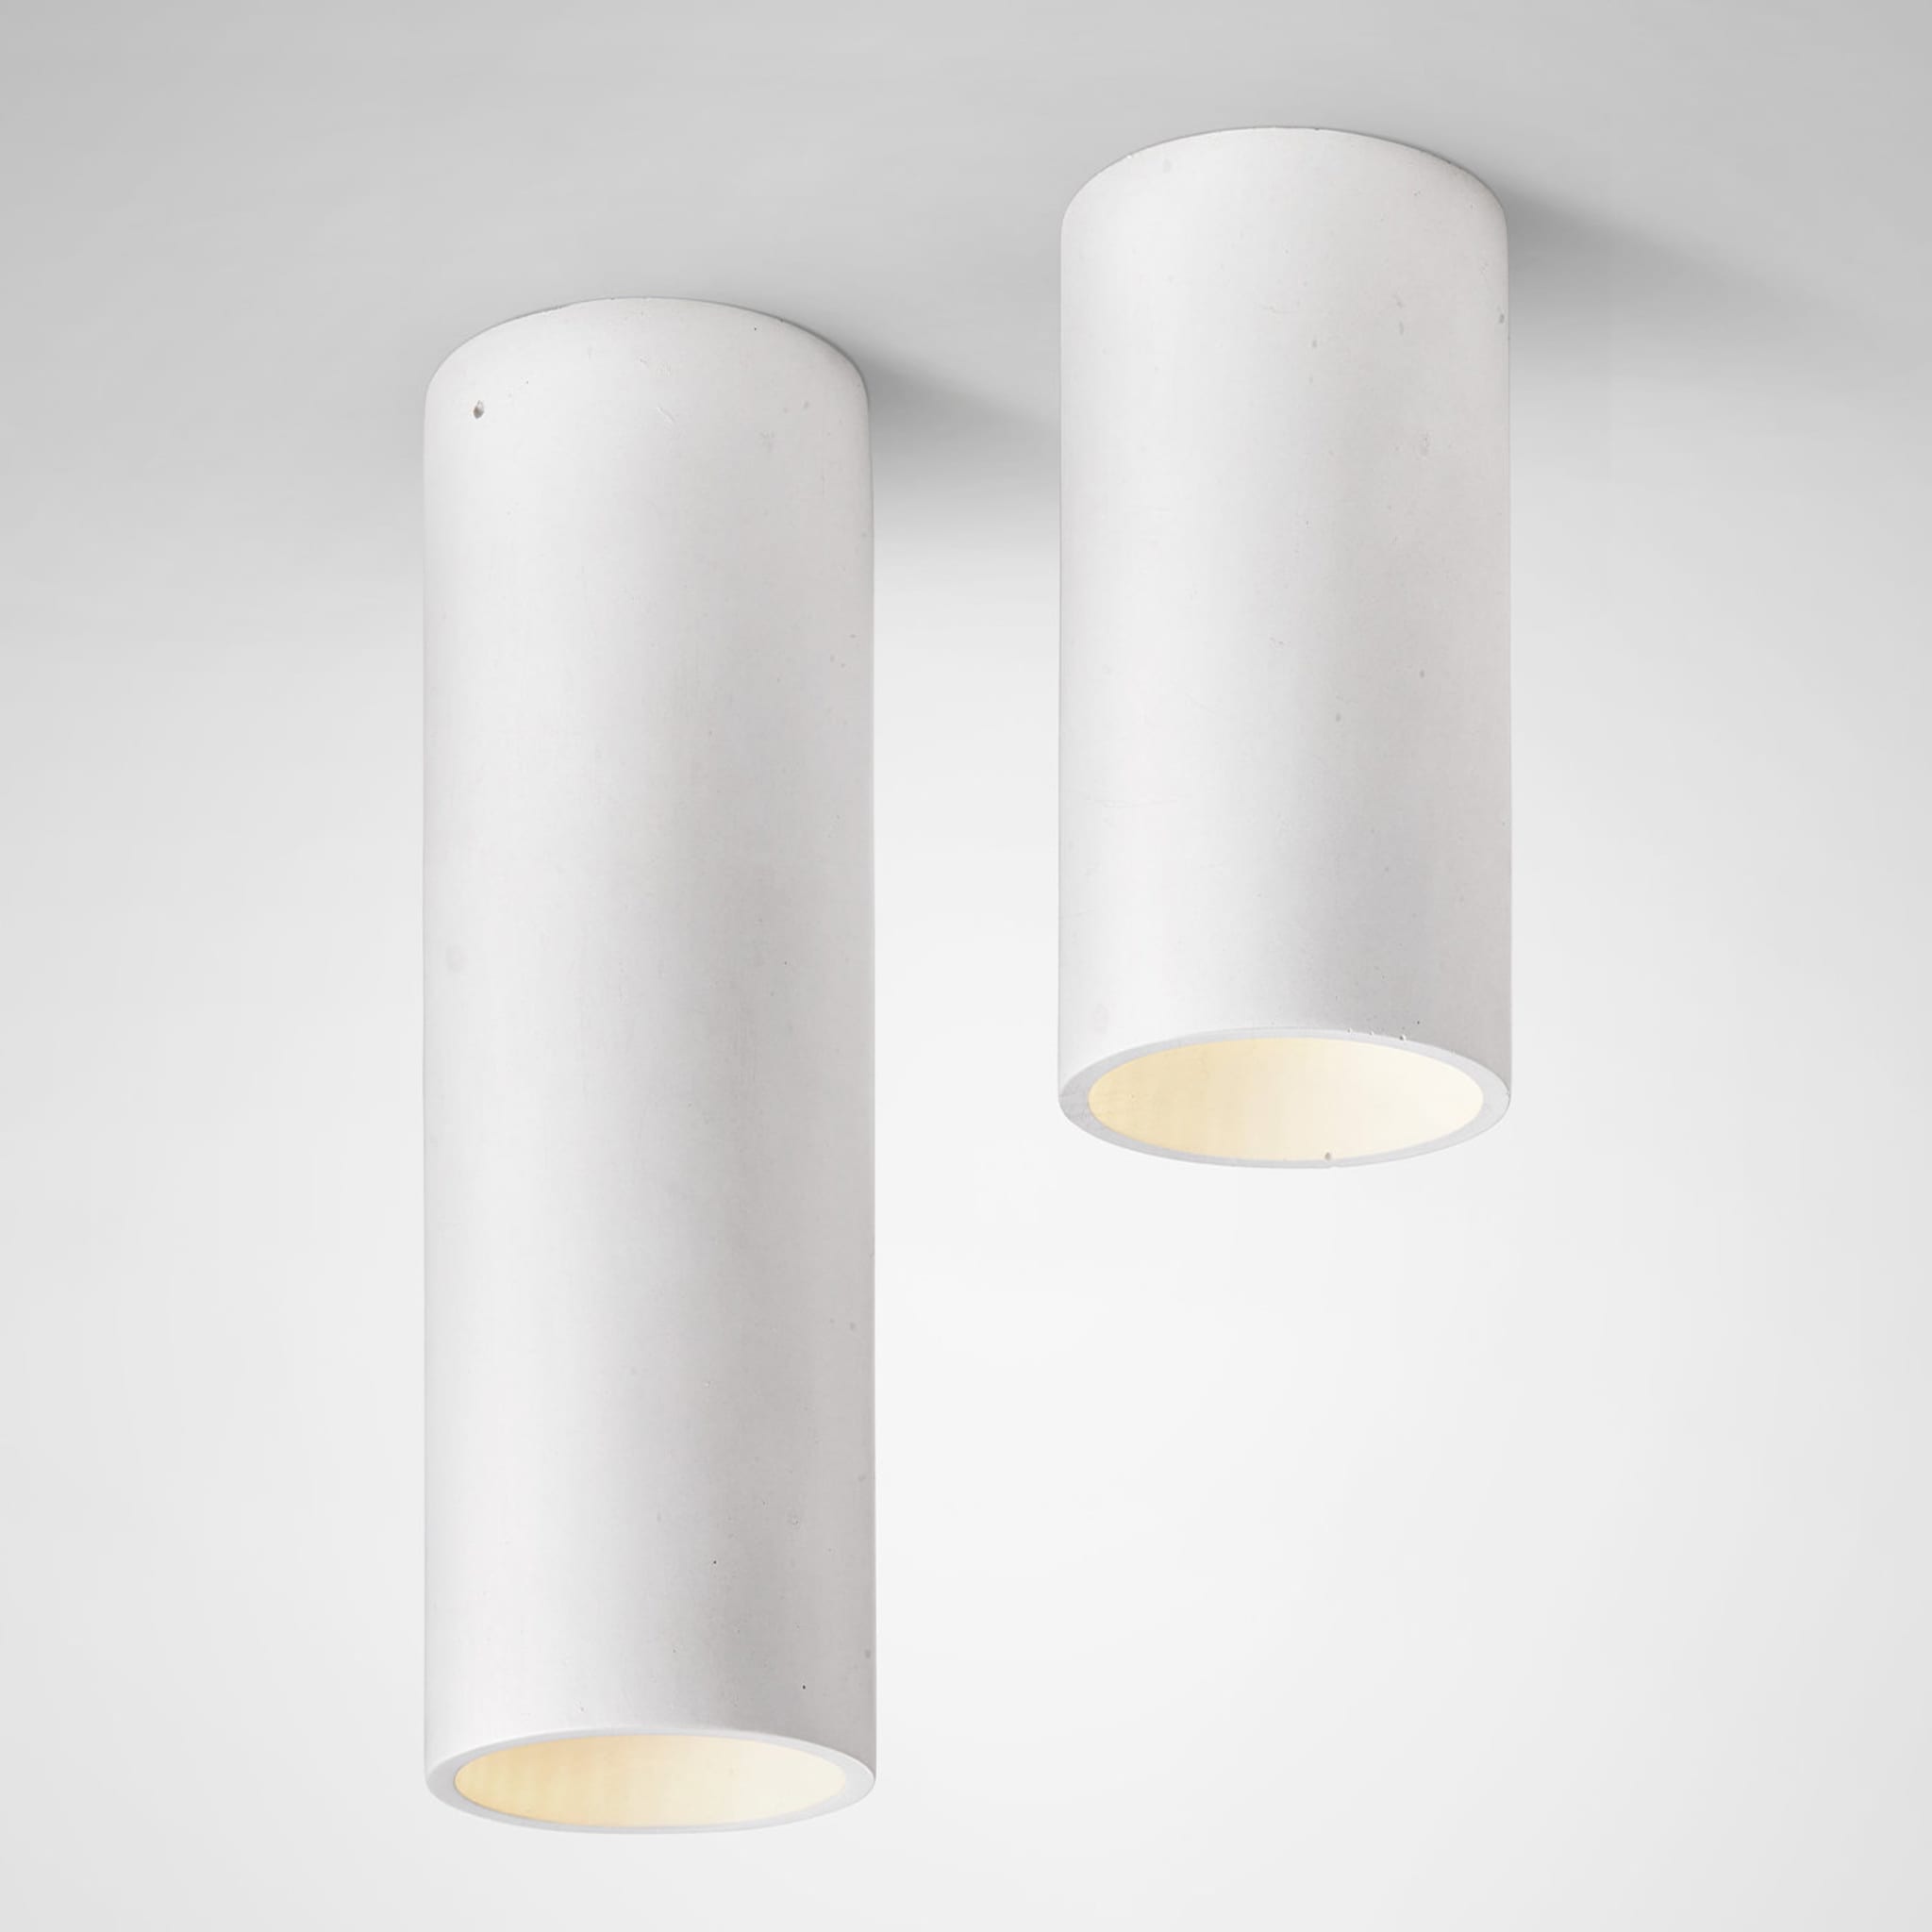 Cromia Large White Ceiling Lamp - Alternative view 1